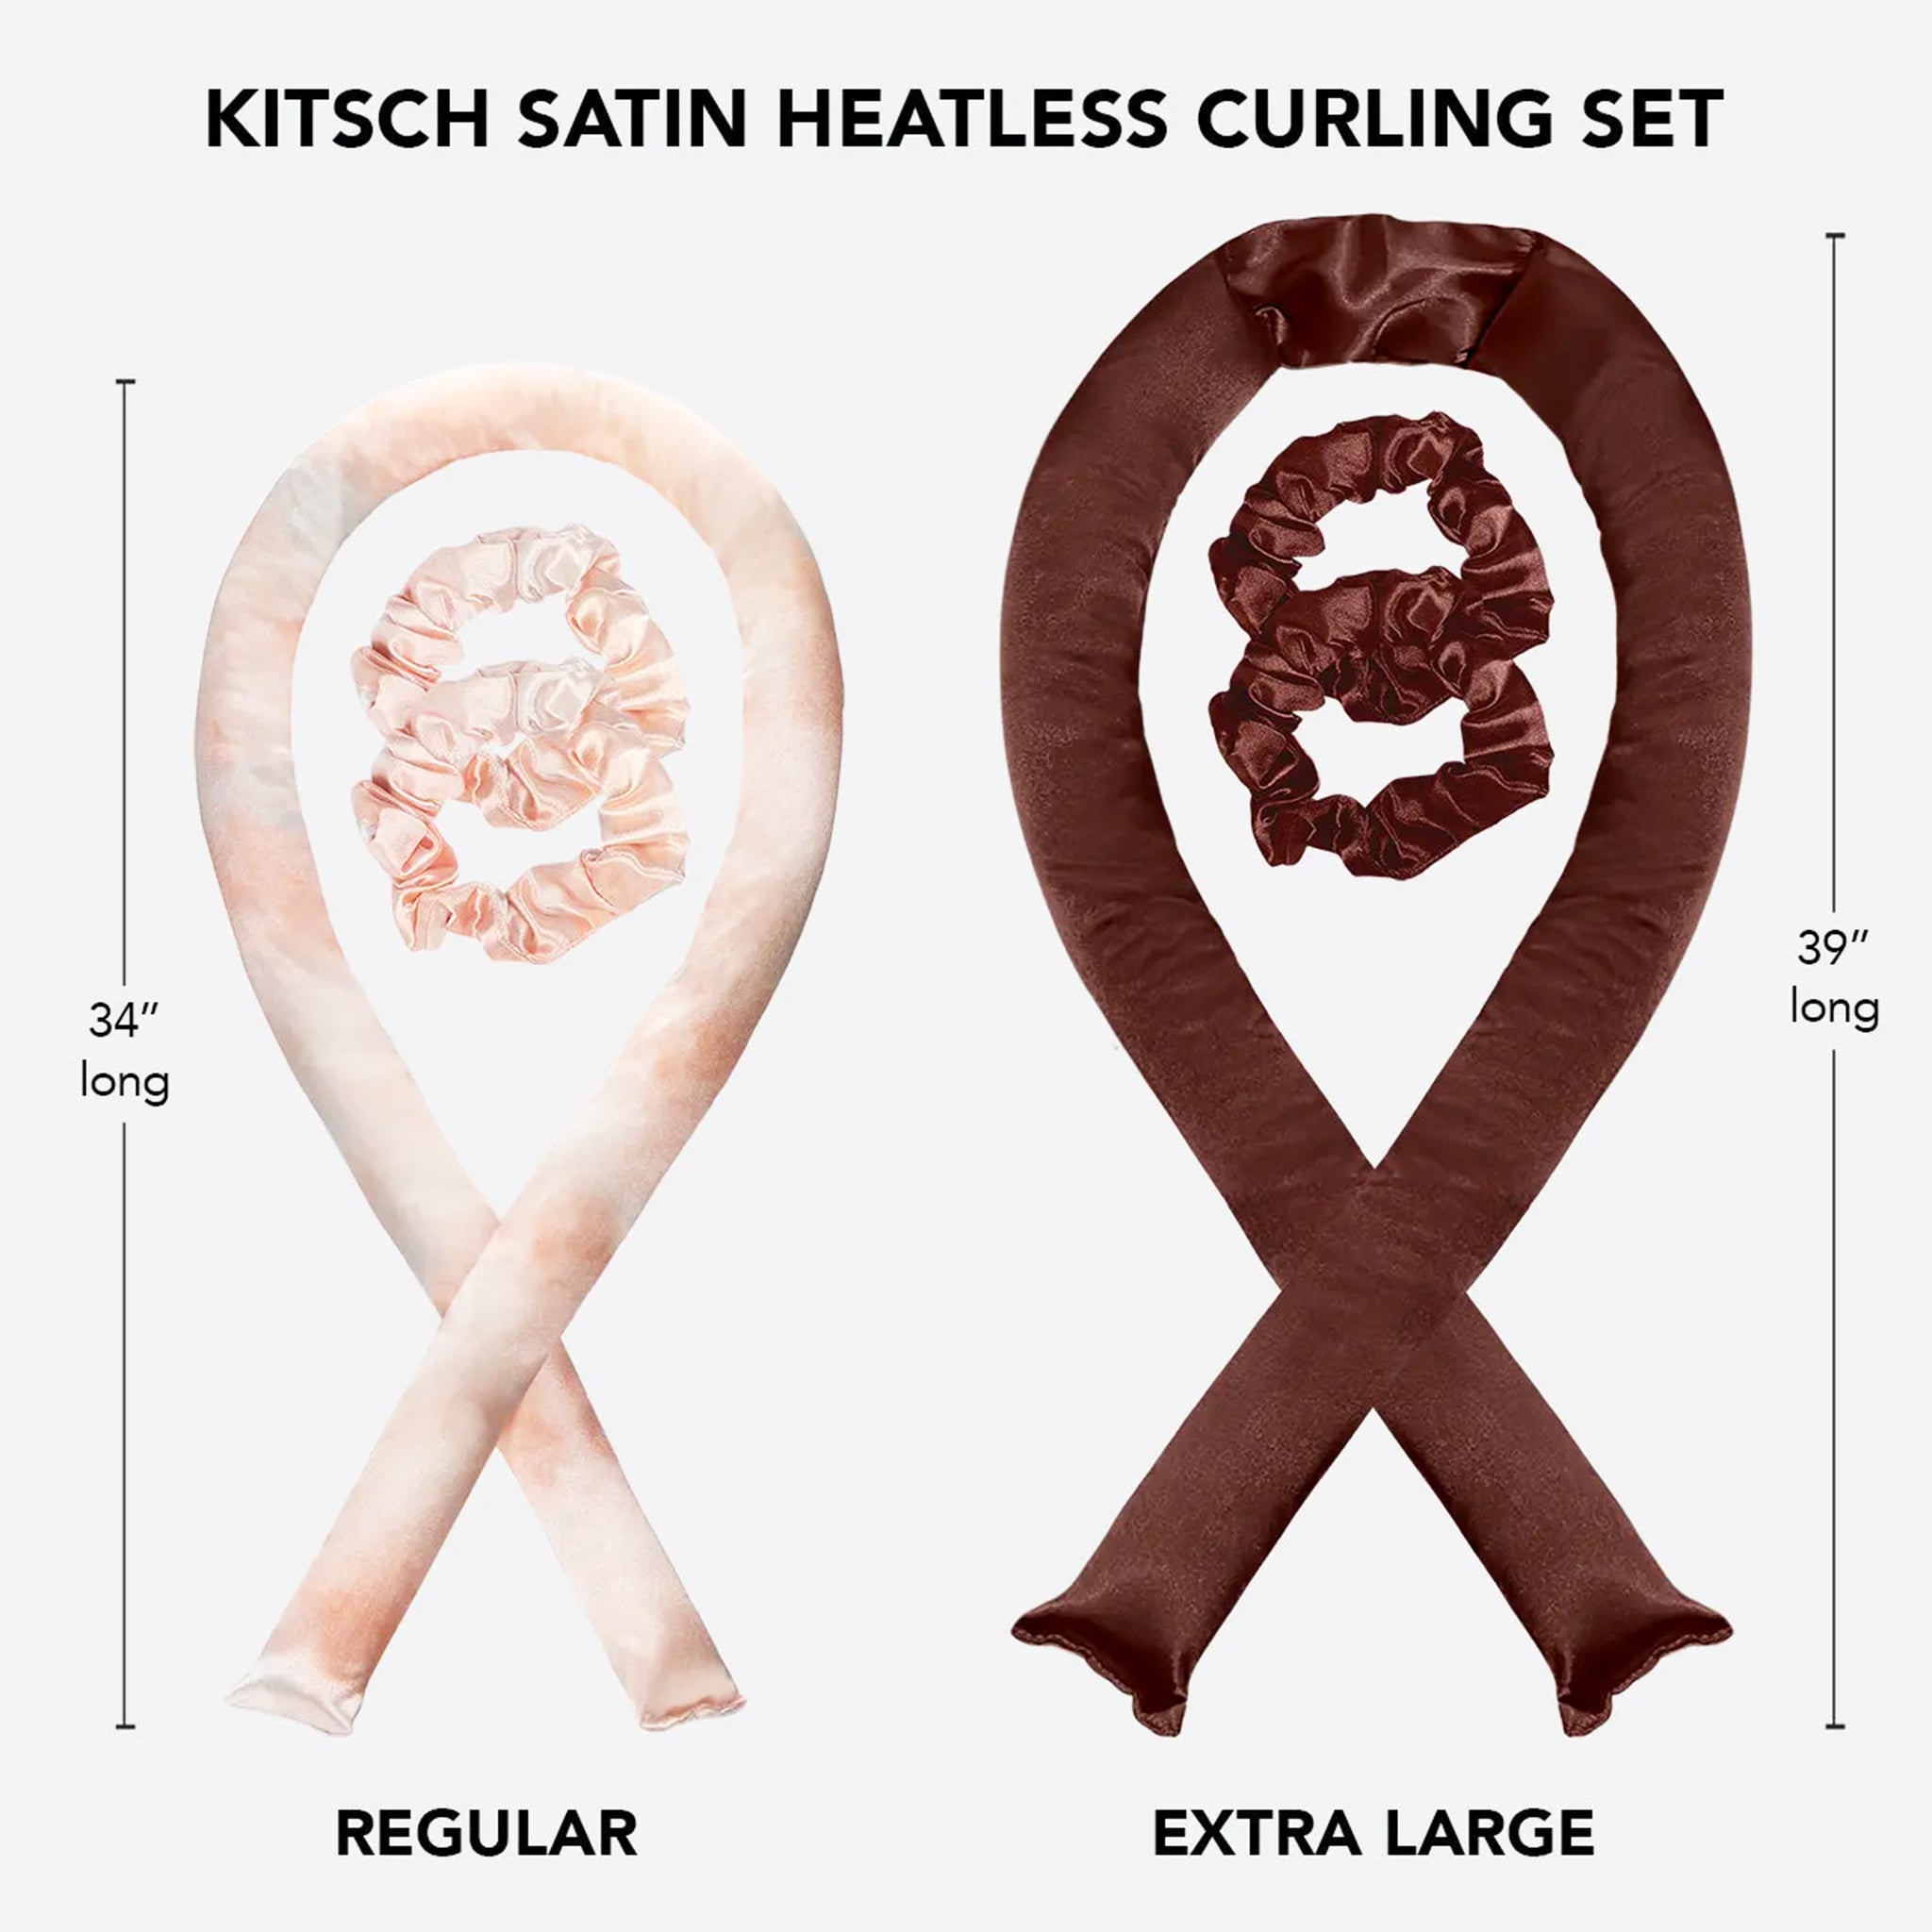 A side by side comparison of the regular heatless curling set in a different color next to the chocolate brown XL version. 